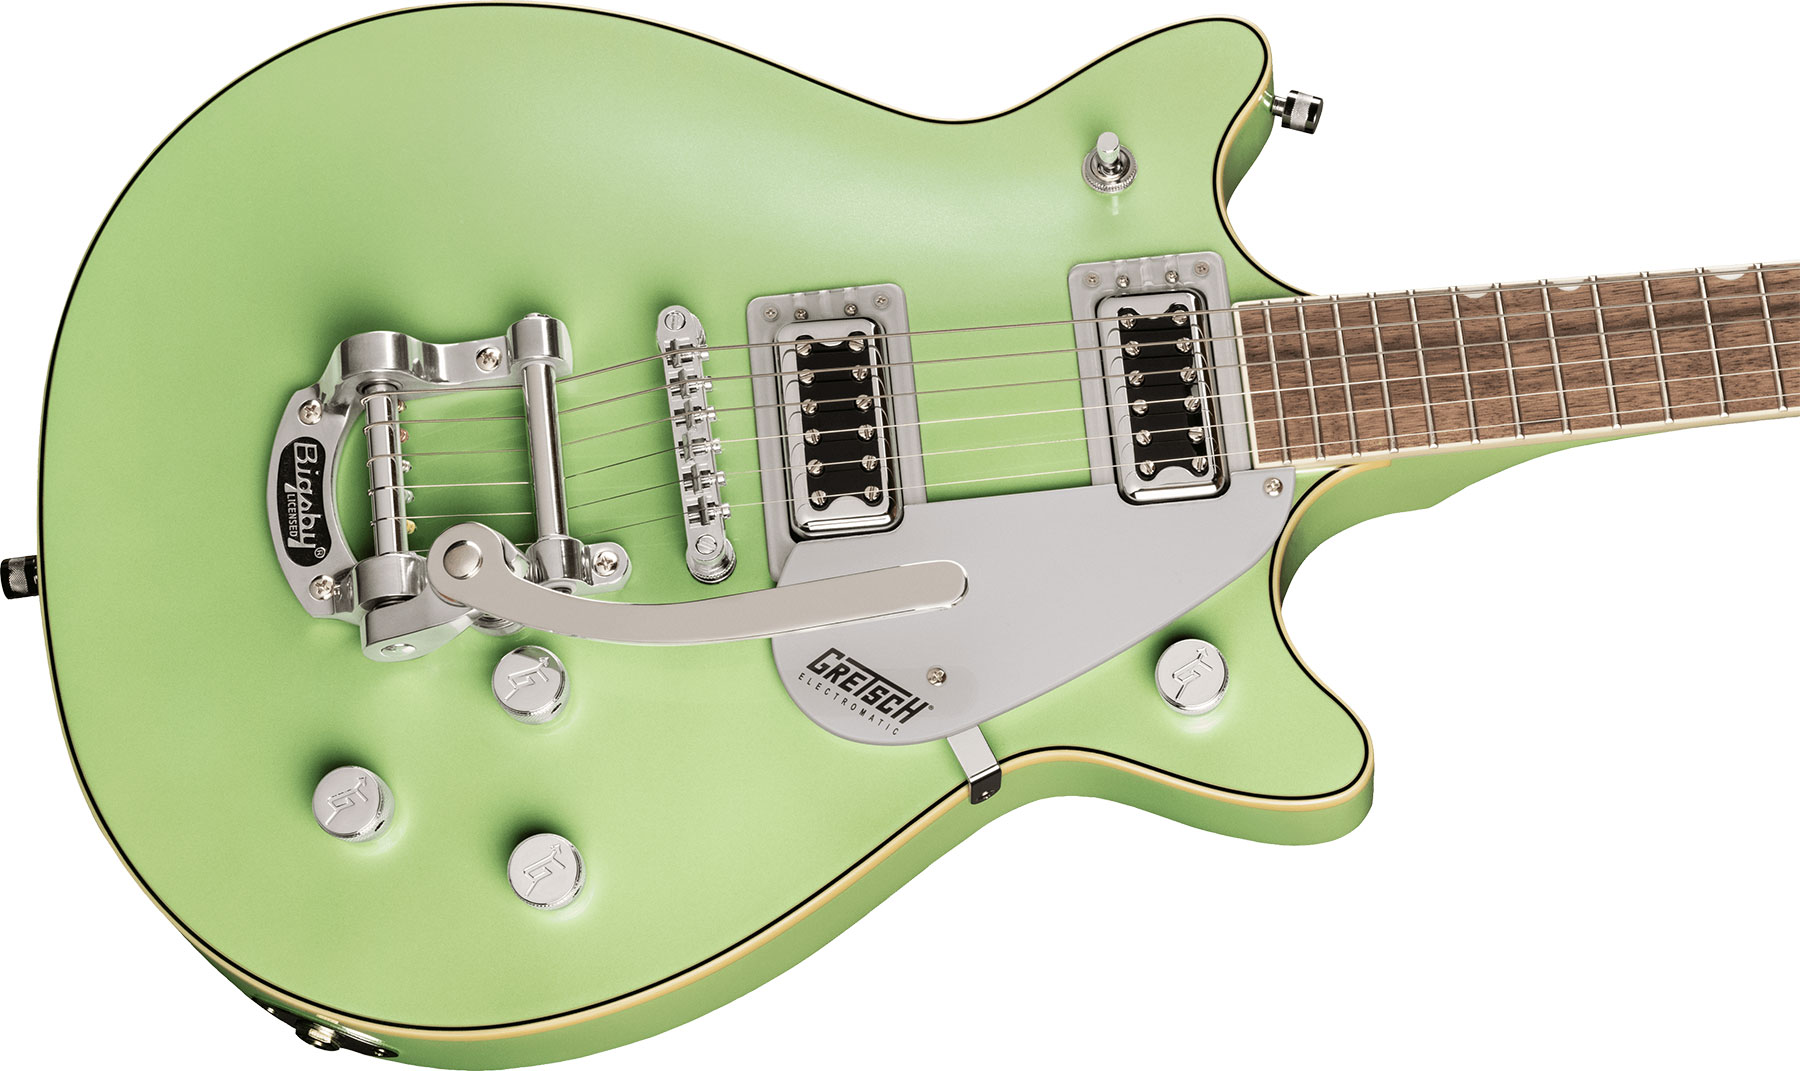 Gretsch G5232t Electromatic Double Jet Ft Hh Bigsby Lau - Broadway Jade - Double cut electric guitar - Variation 2